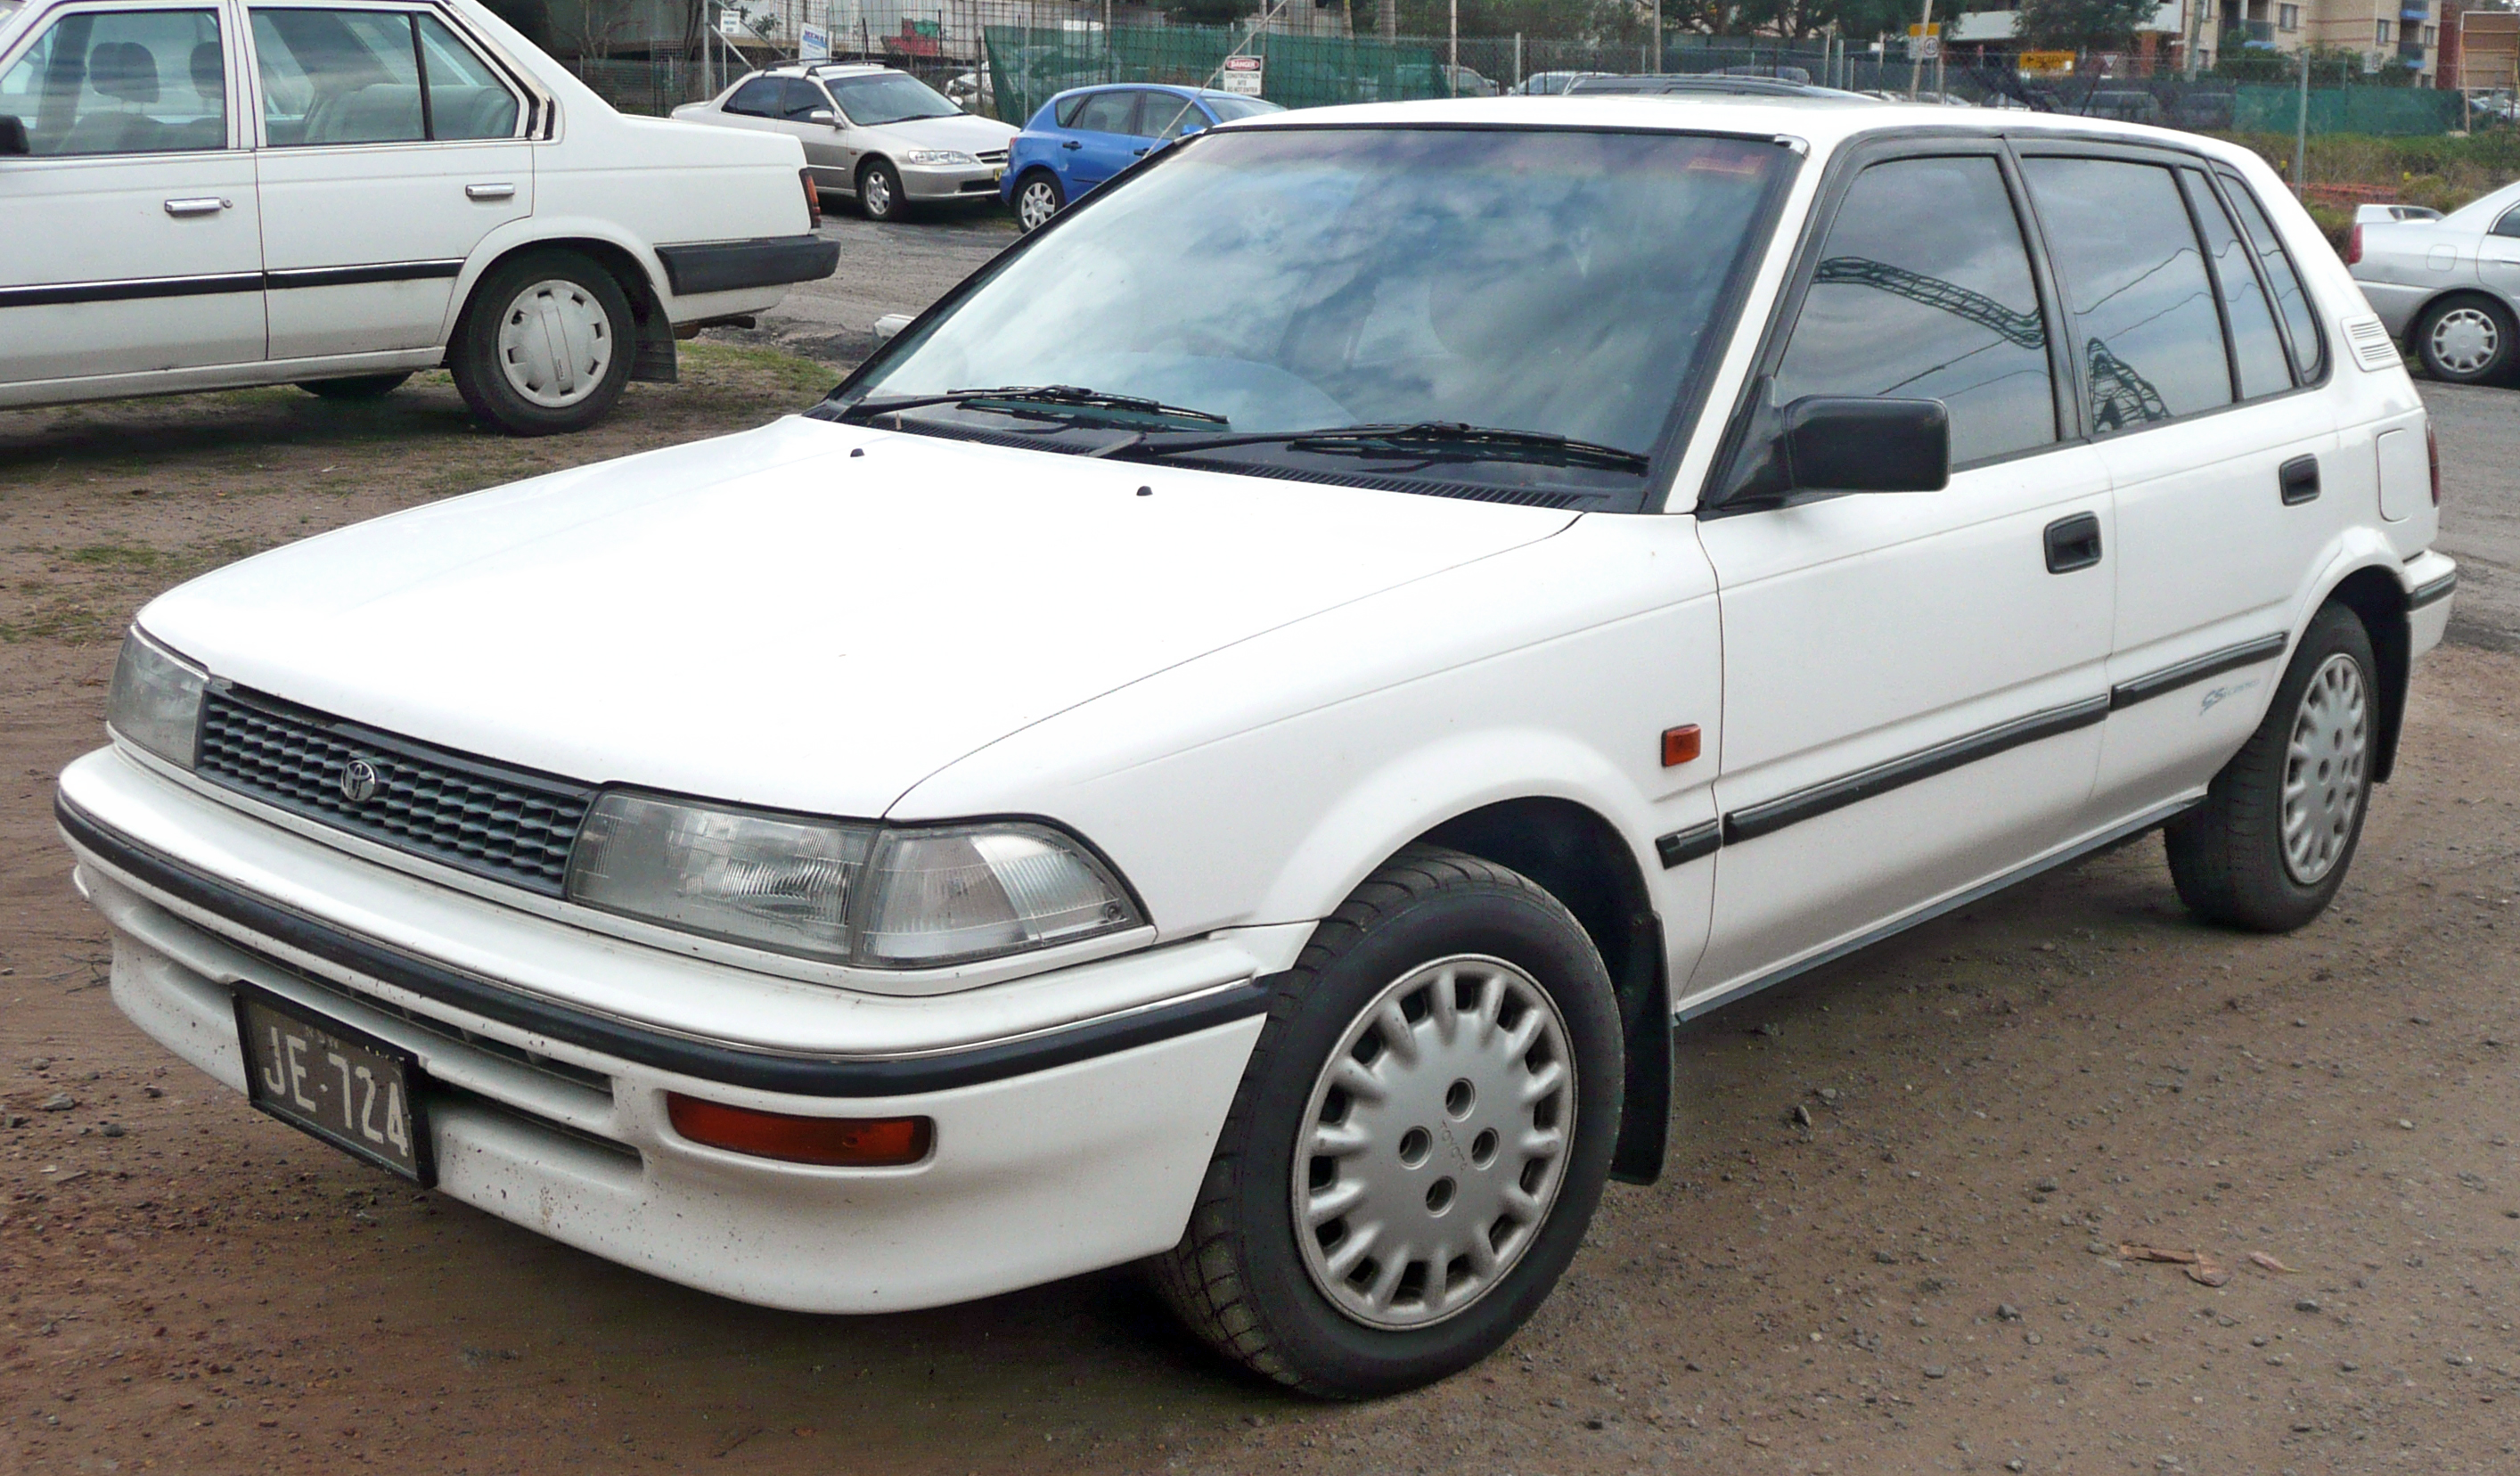 Toyota Corolla 1990 Review Amazing Pictures And Images